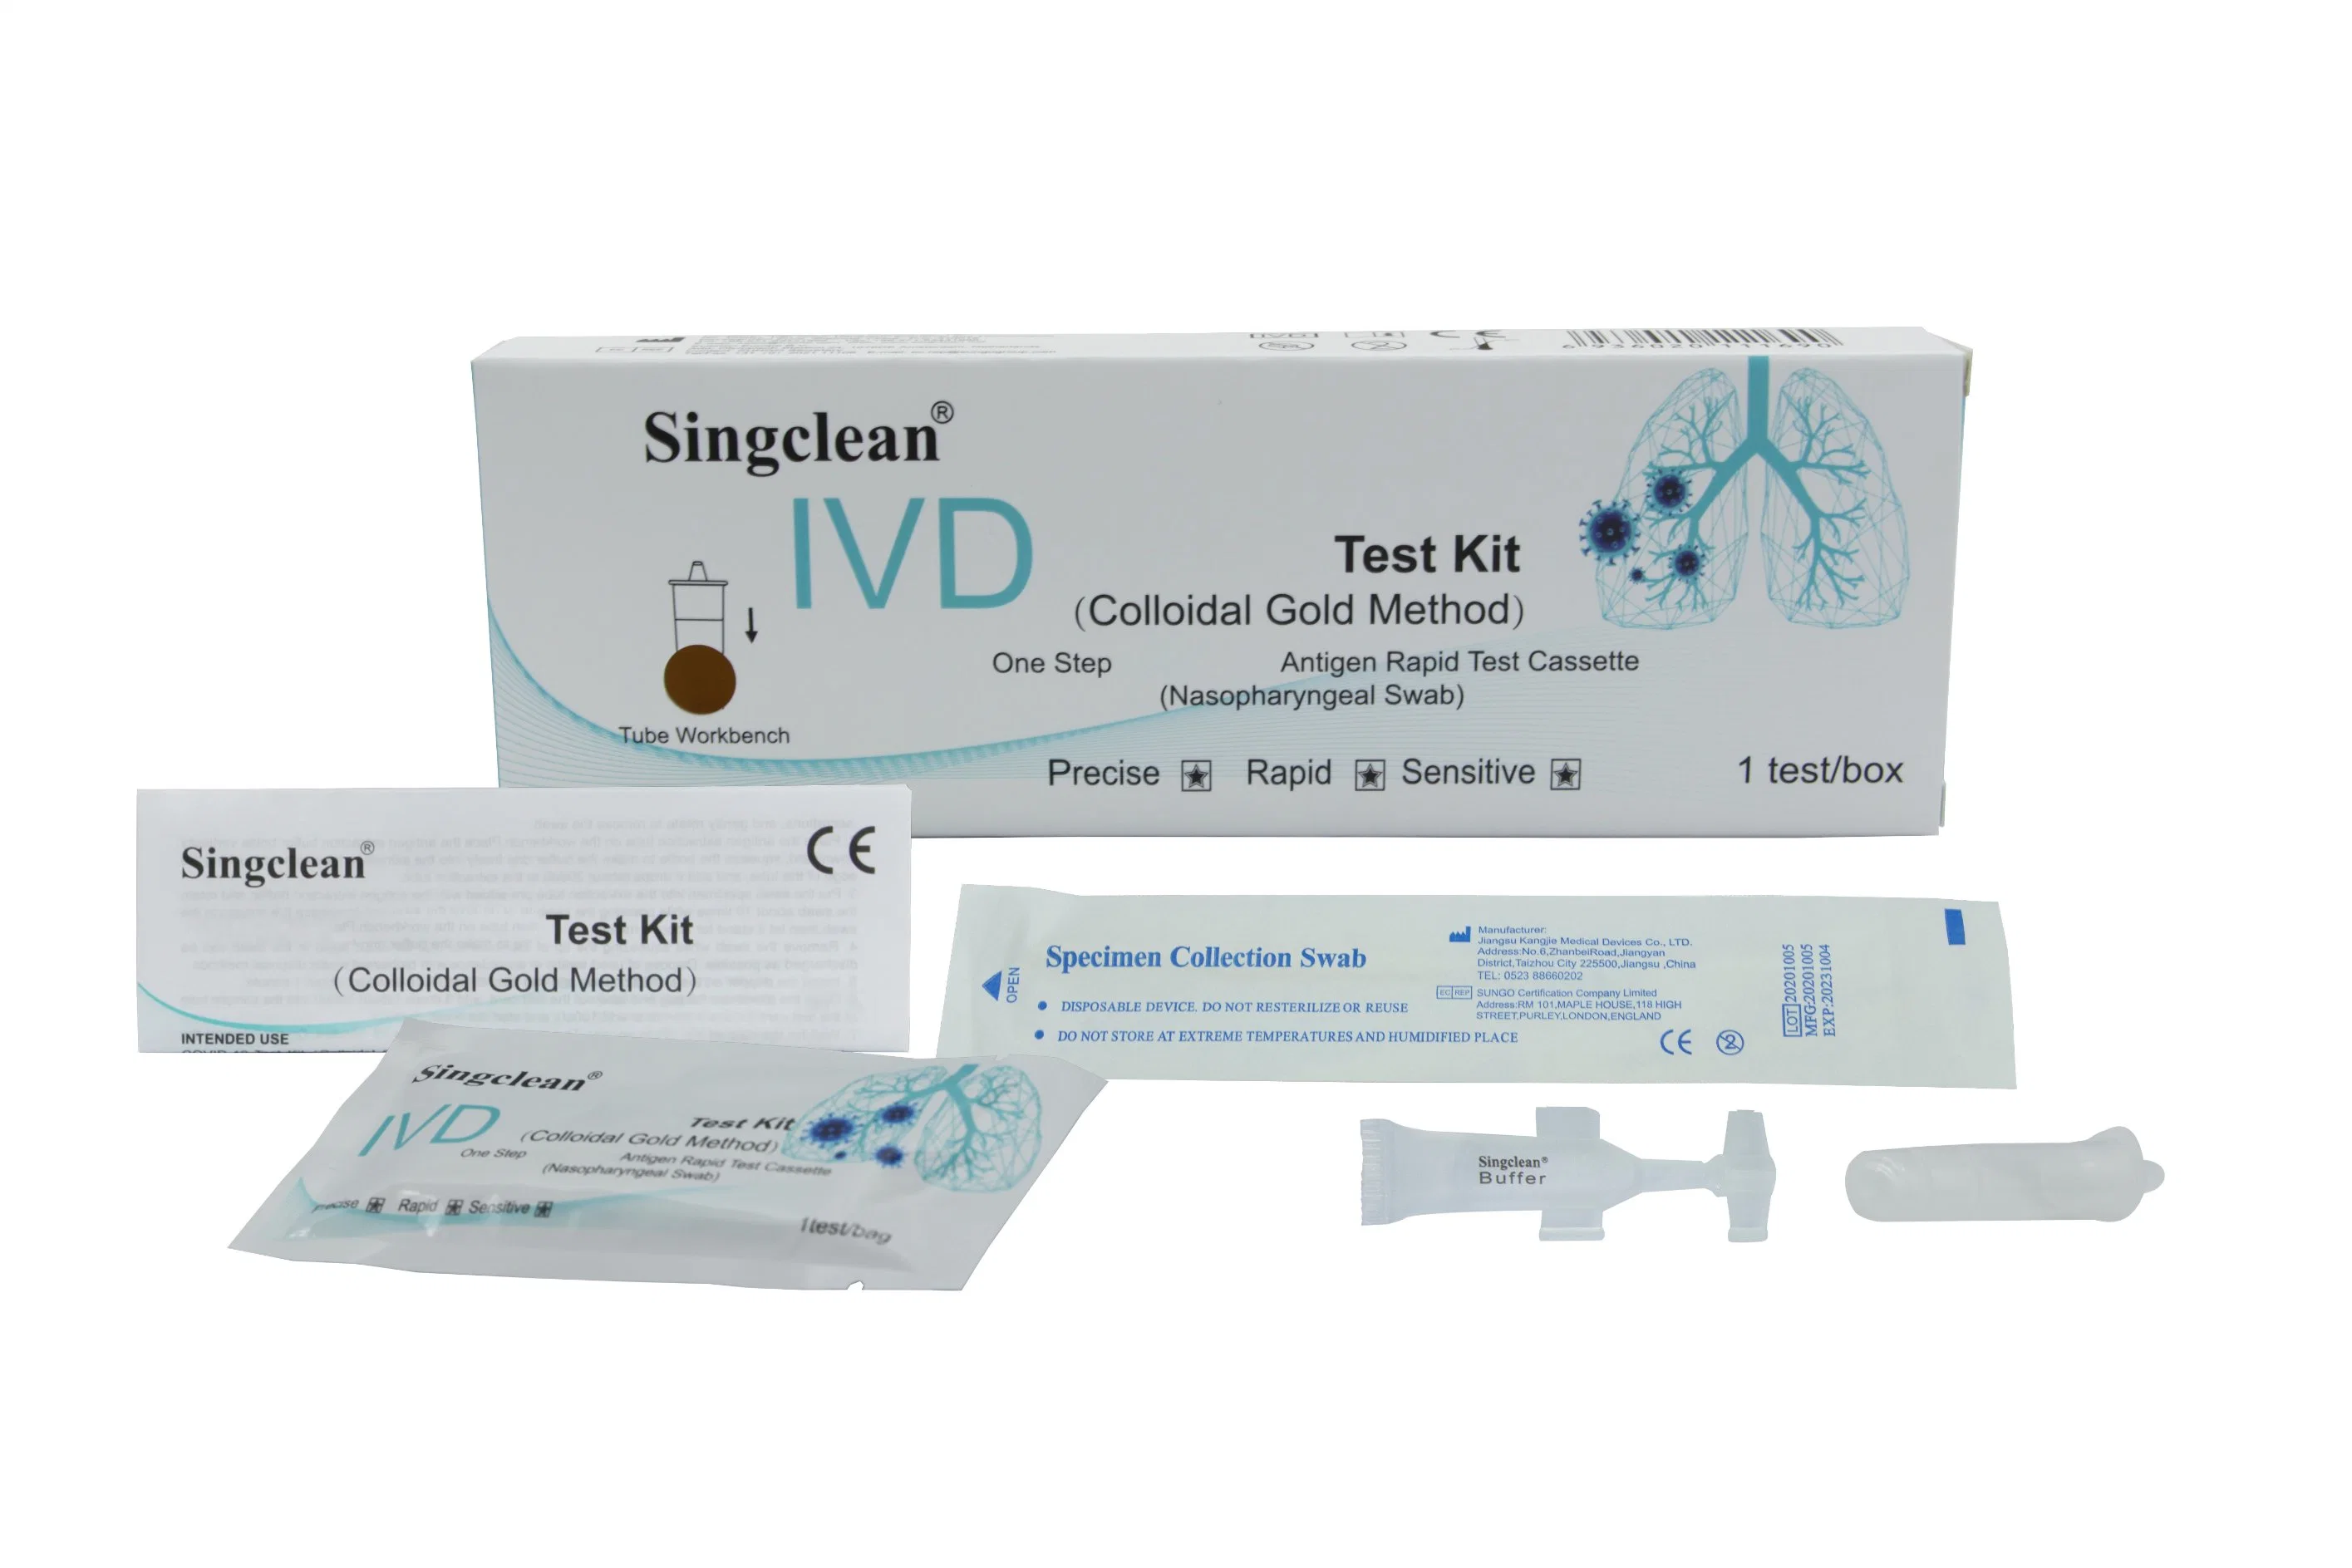 Nasopharyngeal and Antibody Tests Available for Businesses and Medical Professionals Rapid Diagnostic Test